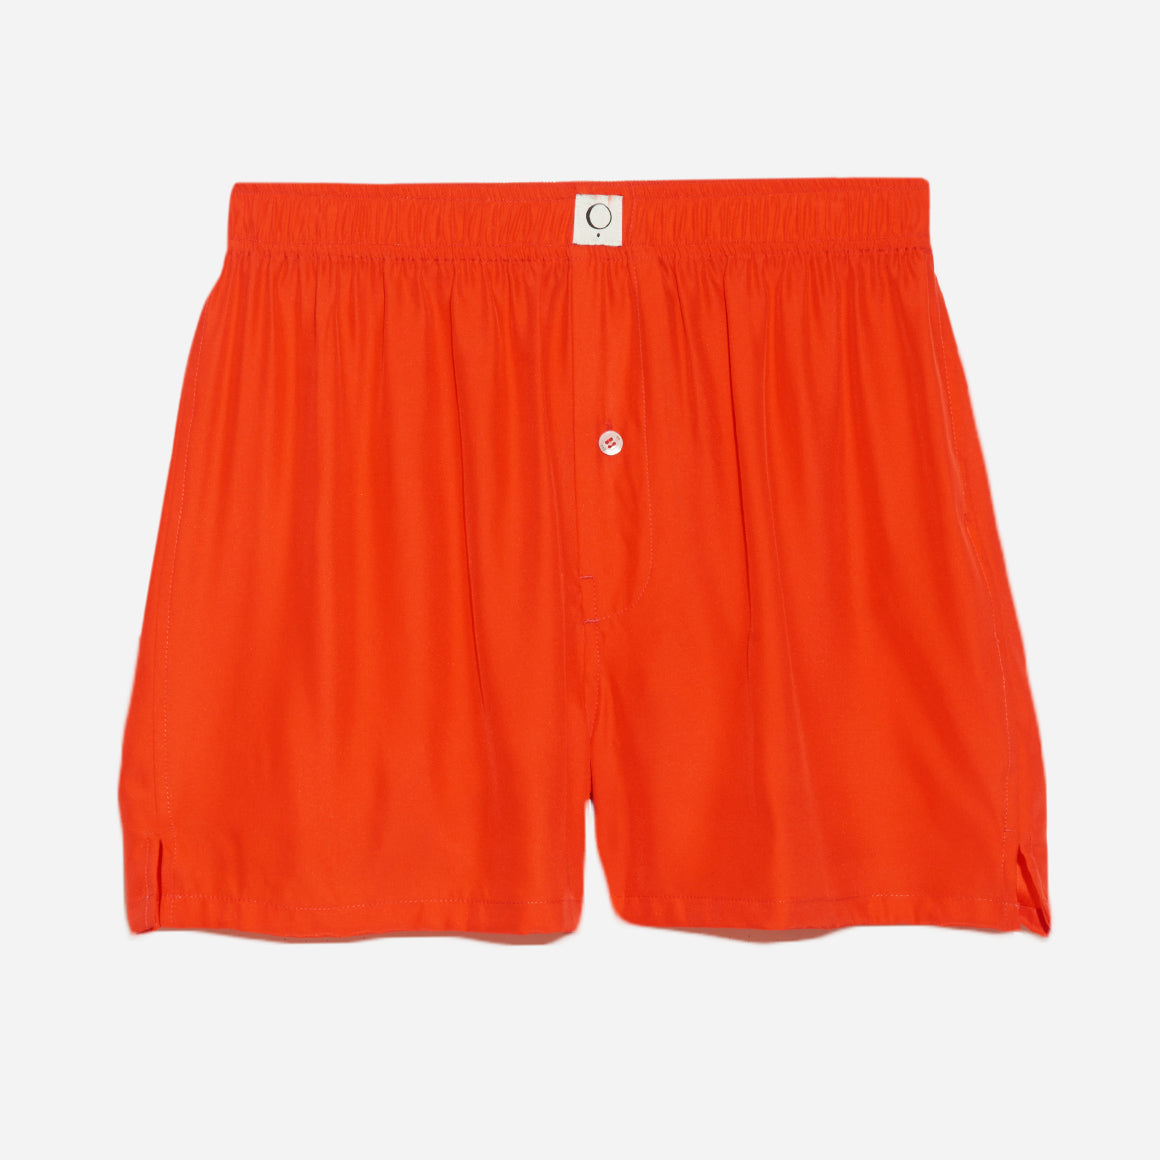 Our washable silk boxer shorts feature a relaxed fit, button fly, and a soft elastic waistband that when folded over reveals a contrast pop of color. The lightweight fabric offers breathability and comfort for a peaceful night's sleep and a stylish look that is perfect for lounging at home.